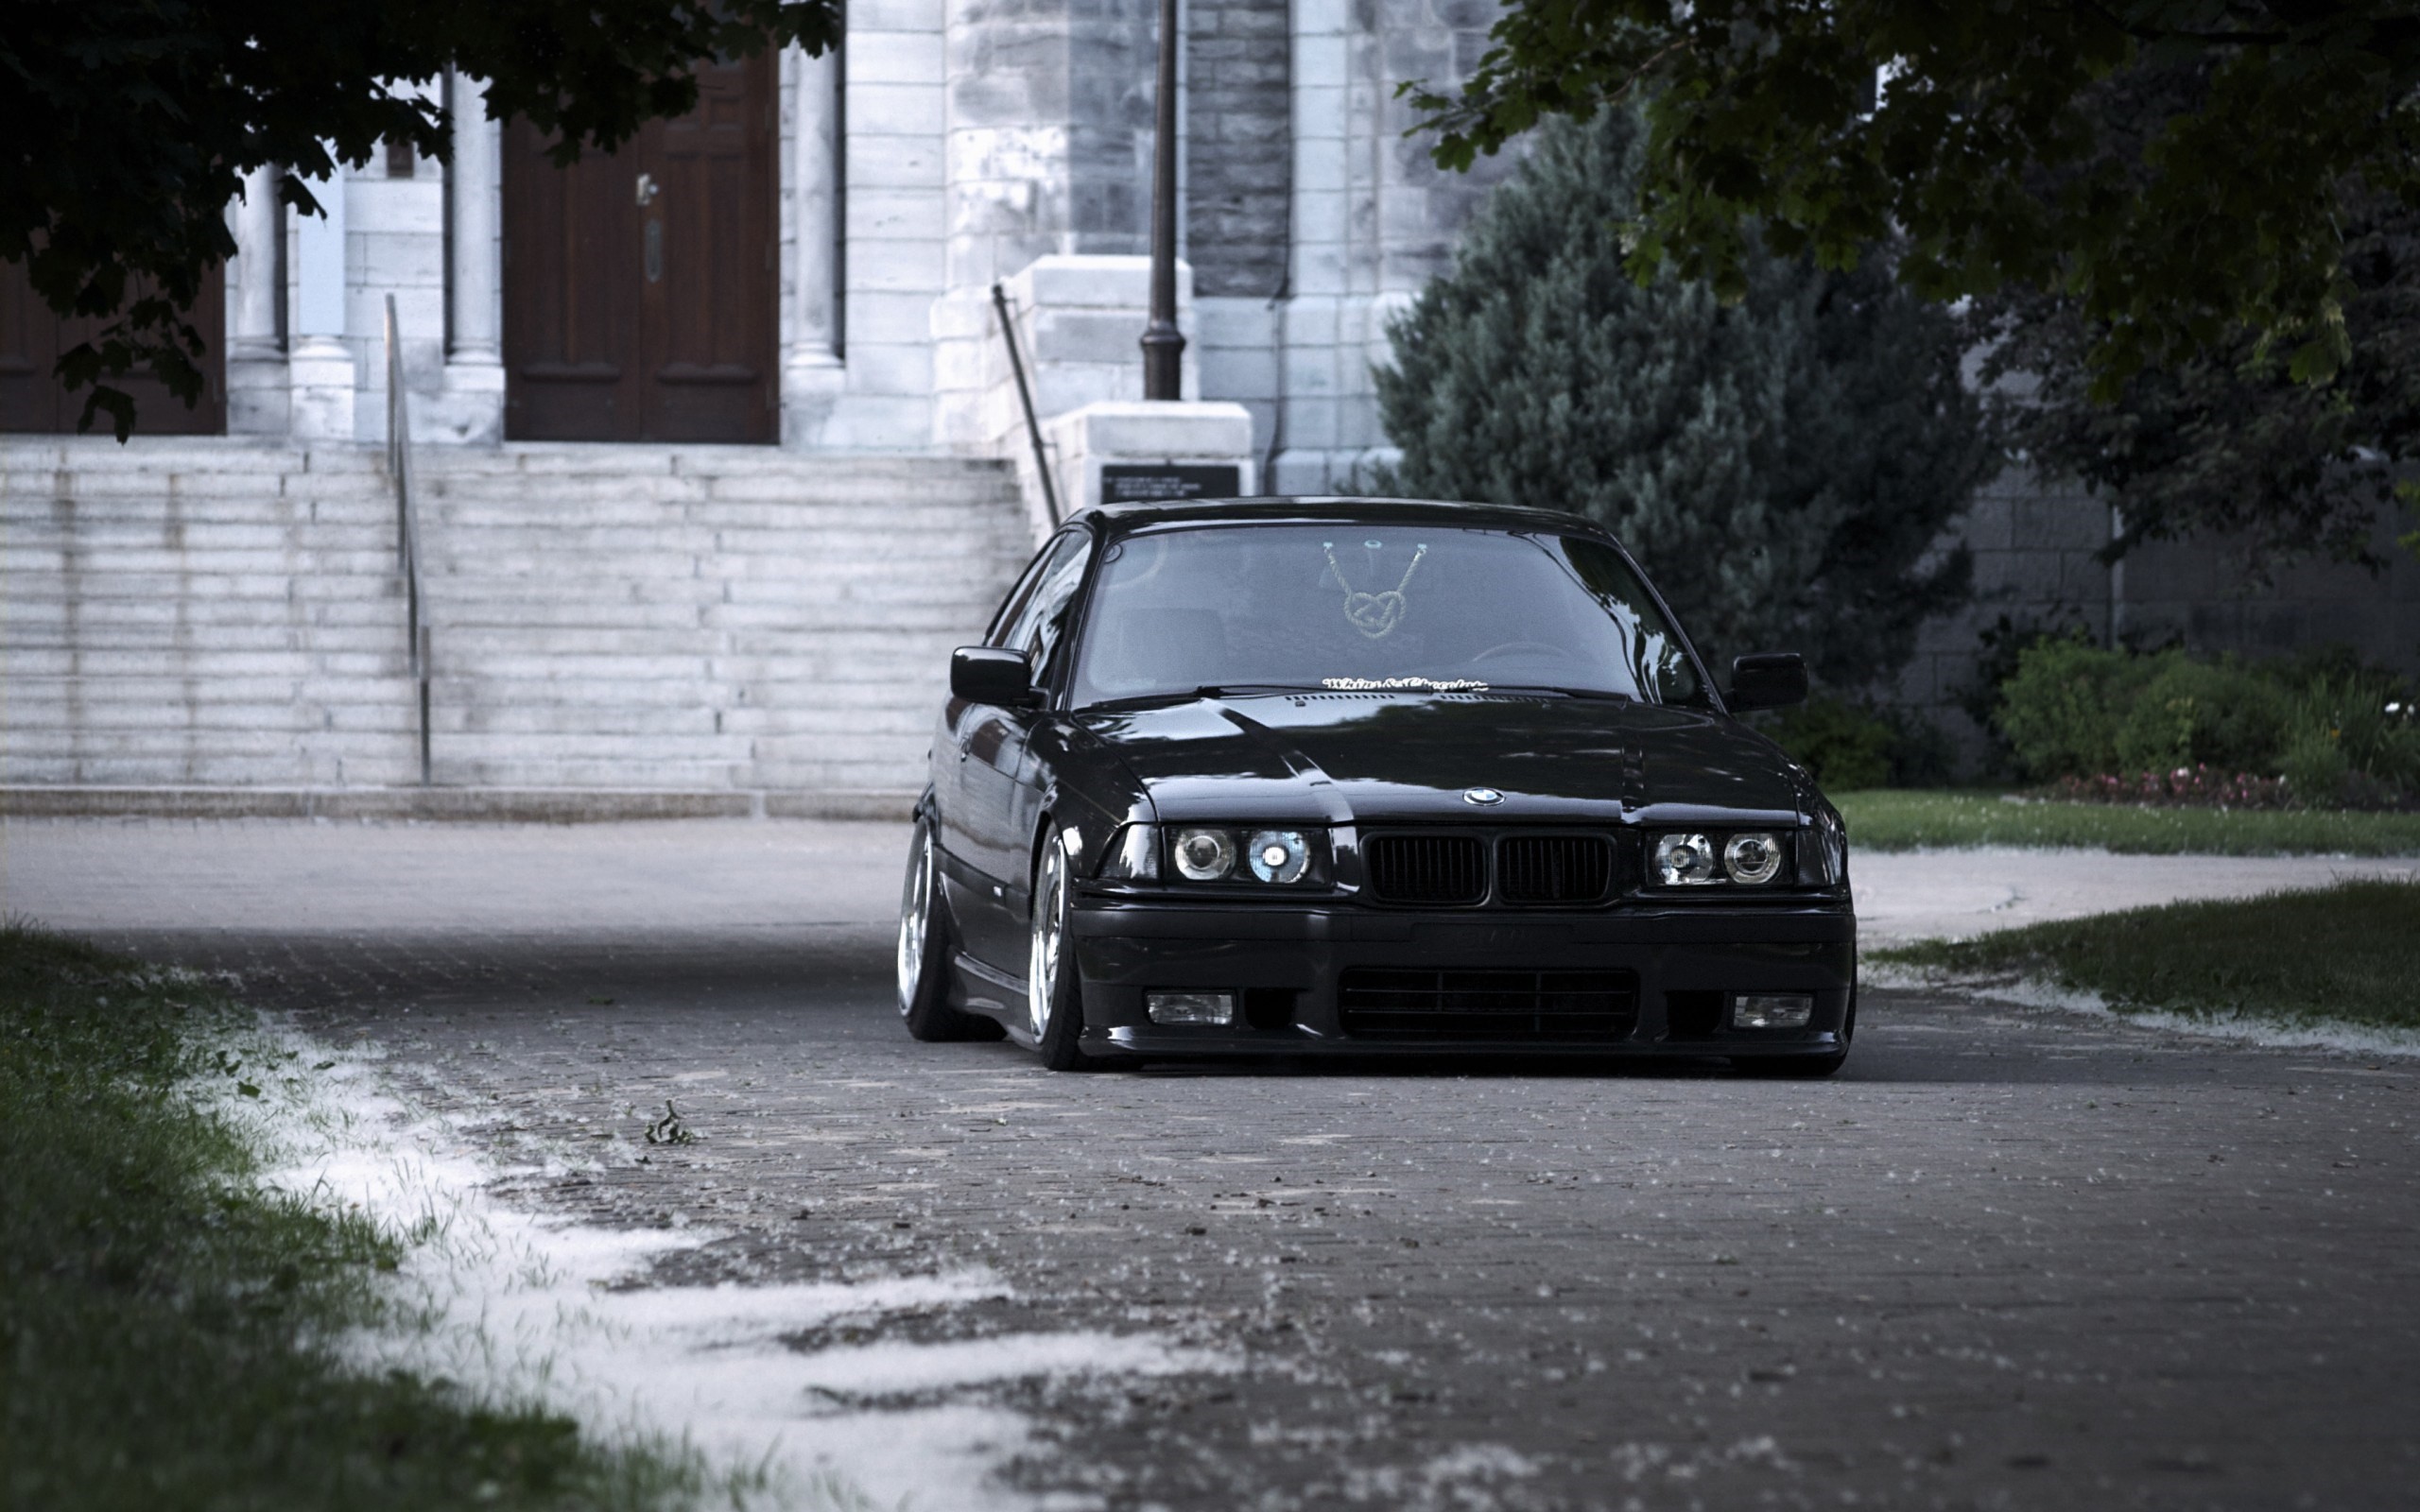 2560x1600 952+ Best HD Bmw E36 Wallpapers, 2603921  px